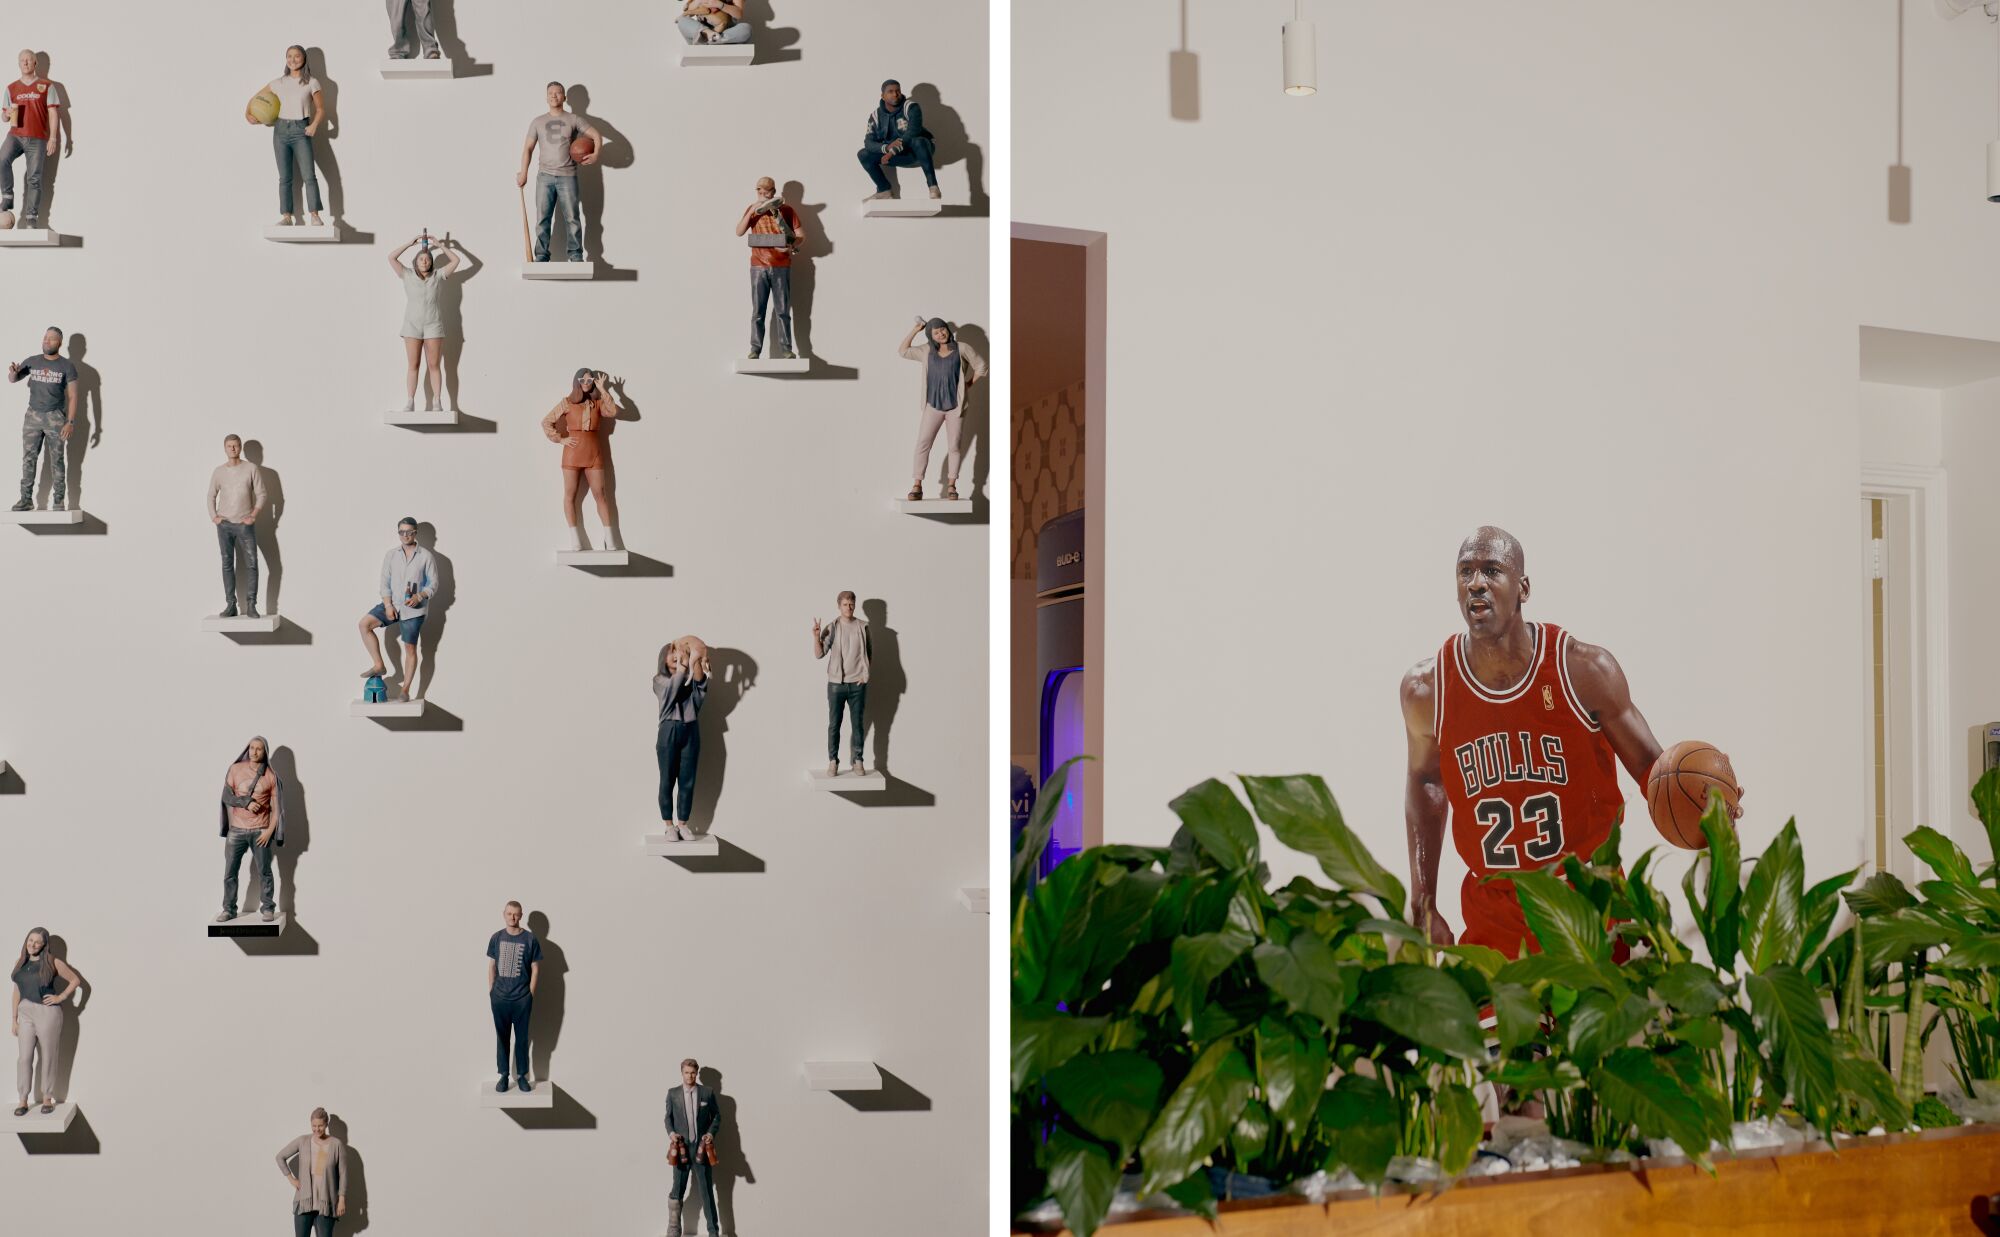 Side-by-side images of figurines of each employee and a poster of Michael Jordan.